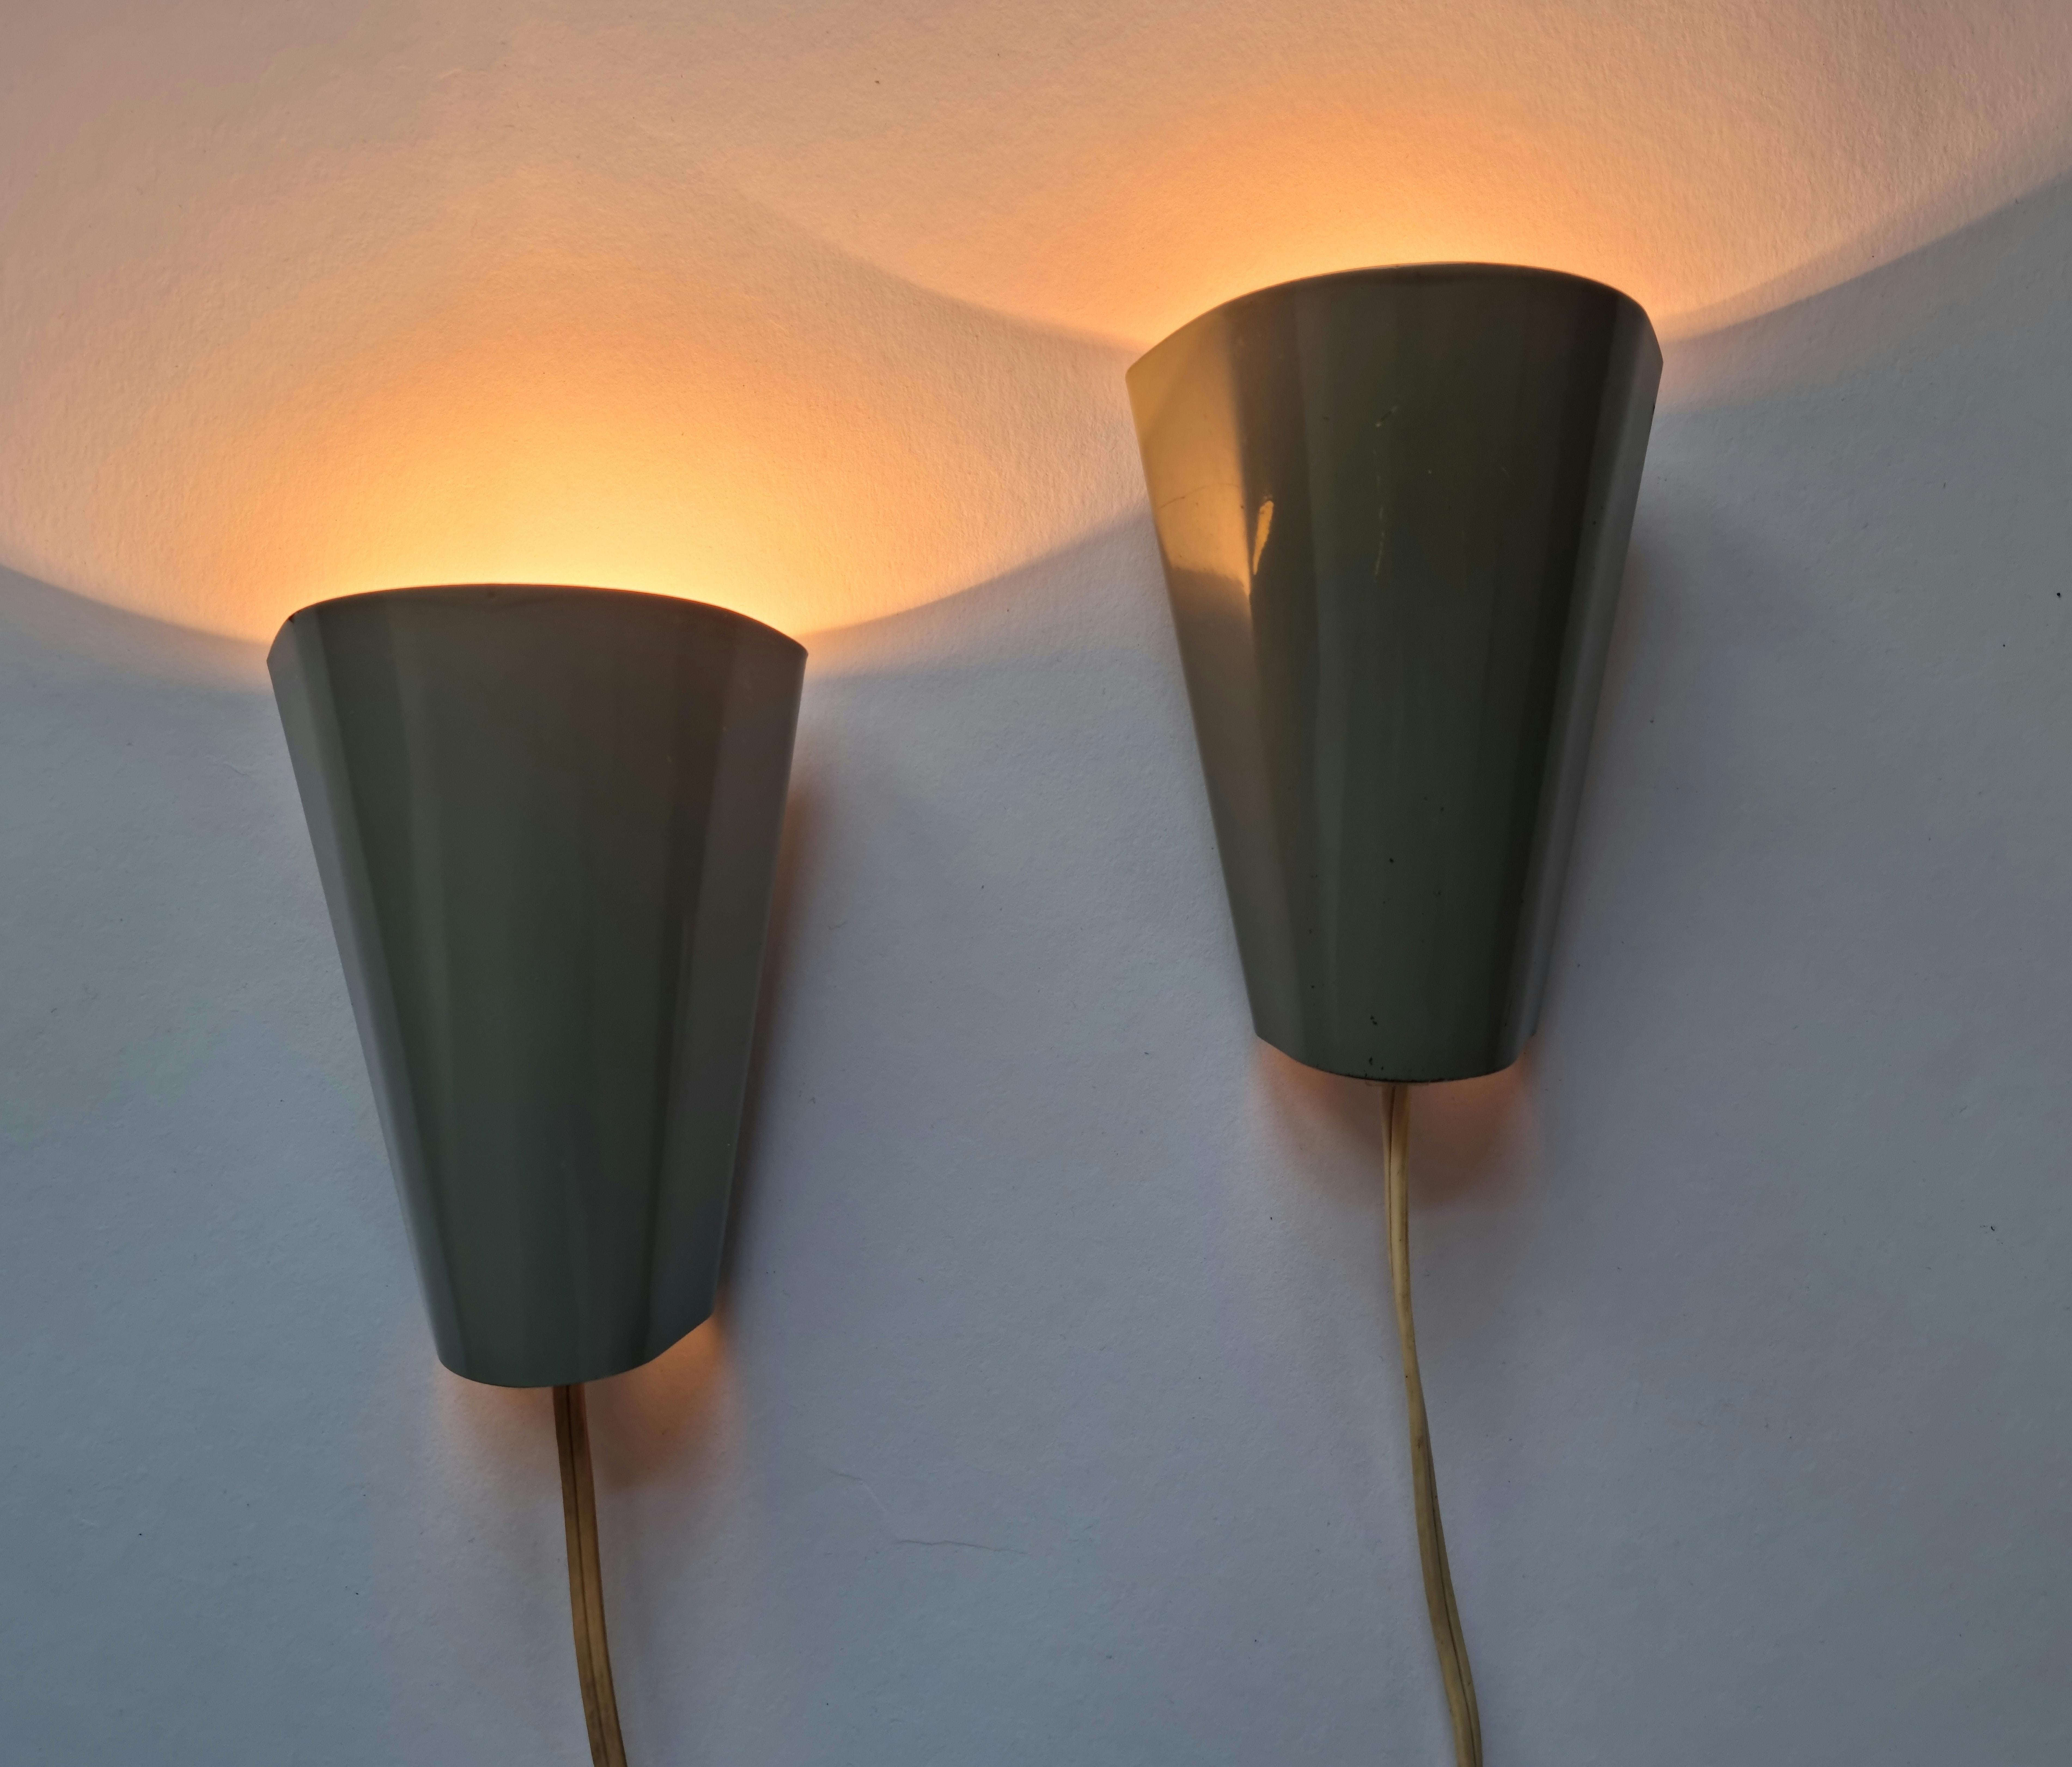 Pair of Mid-Century Rare Wall Lamps Lidokov, Designed by Josef Hurka, 1960s For Sale 2